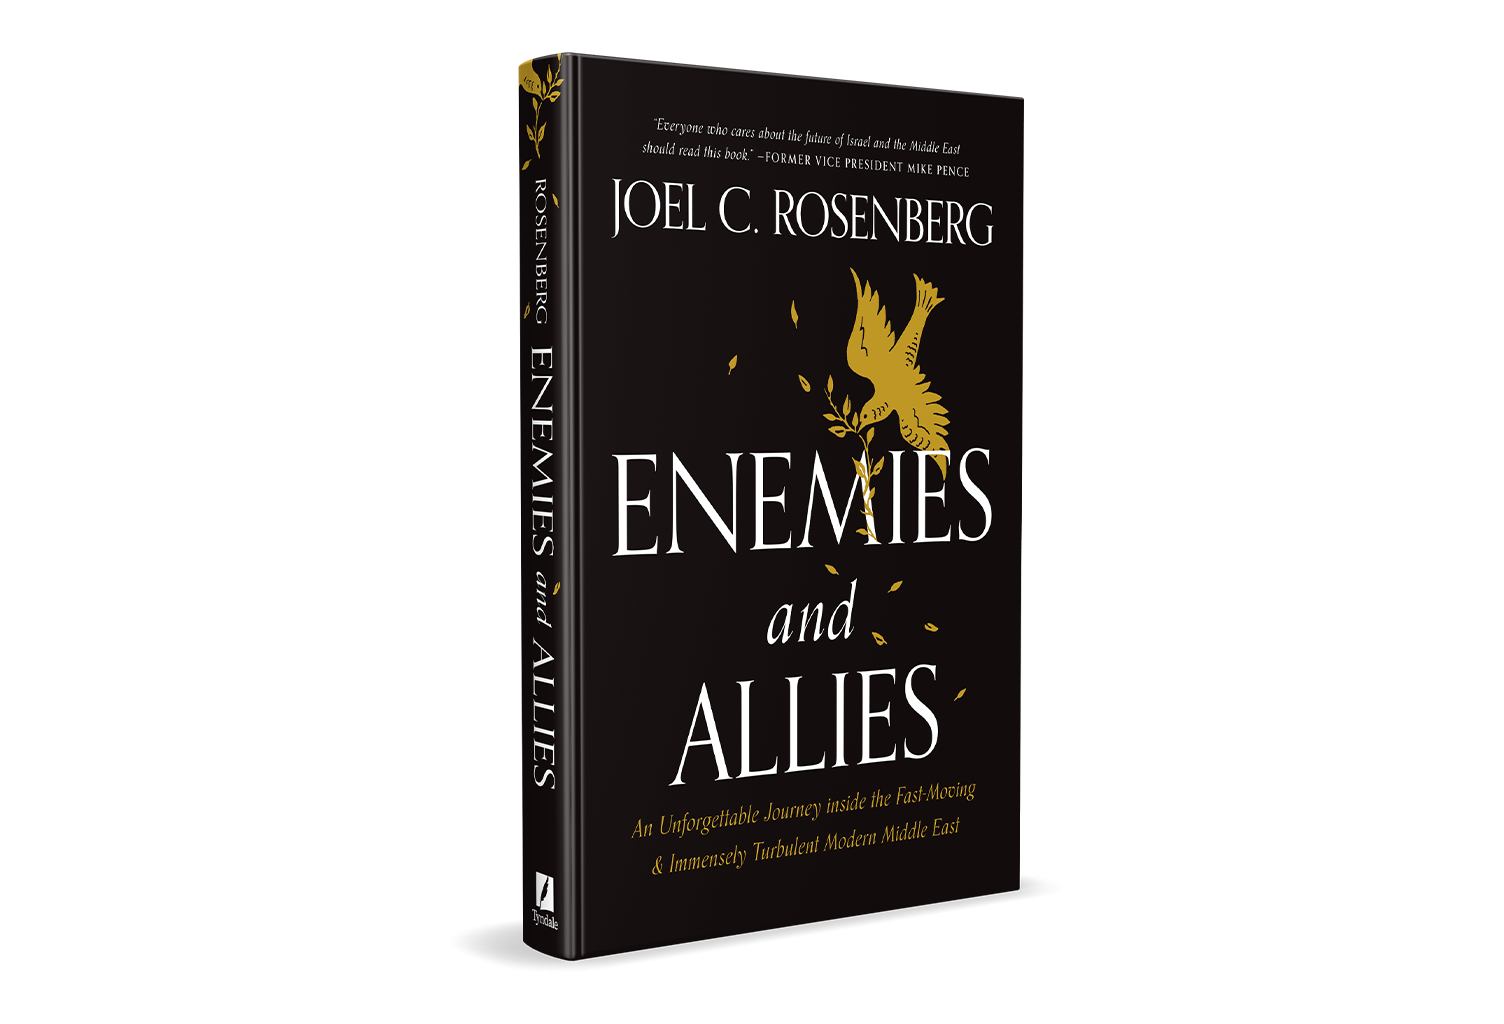 Enemies and Allies: An Unforgettable Journey Inside the Fast-Moving & Immensely Turbulent Modern Middle East by Joel Rosenberg on TBN